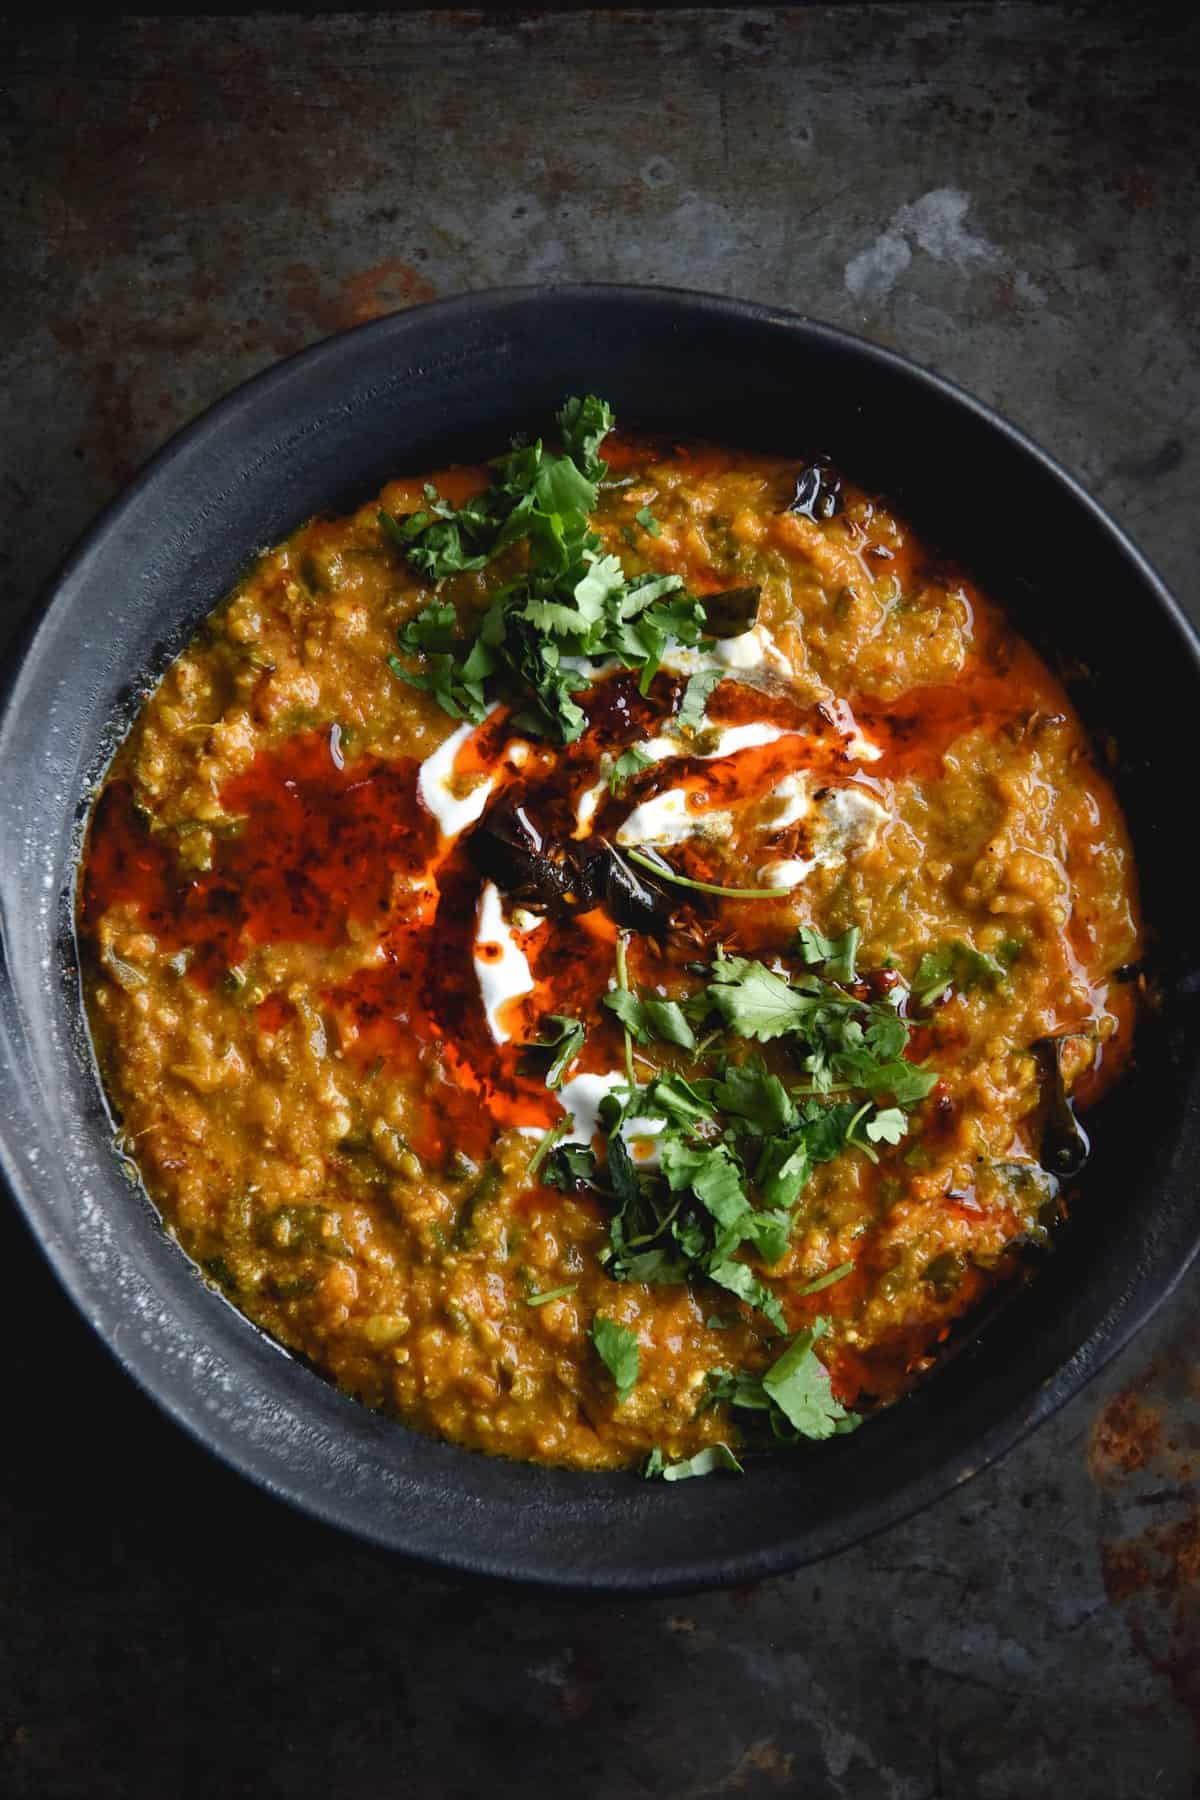 A close up aerial view of a dark ceramic bowl filled with FODMAP friendly dahl. The dahl is topped with a chilli oil tadka, fried curry leaves, chopped coriander and a bit of yoghurt. The bowl is to the right of the image and sits on a dark blue backdrop